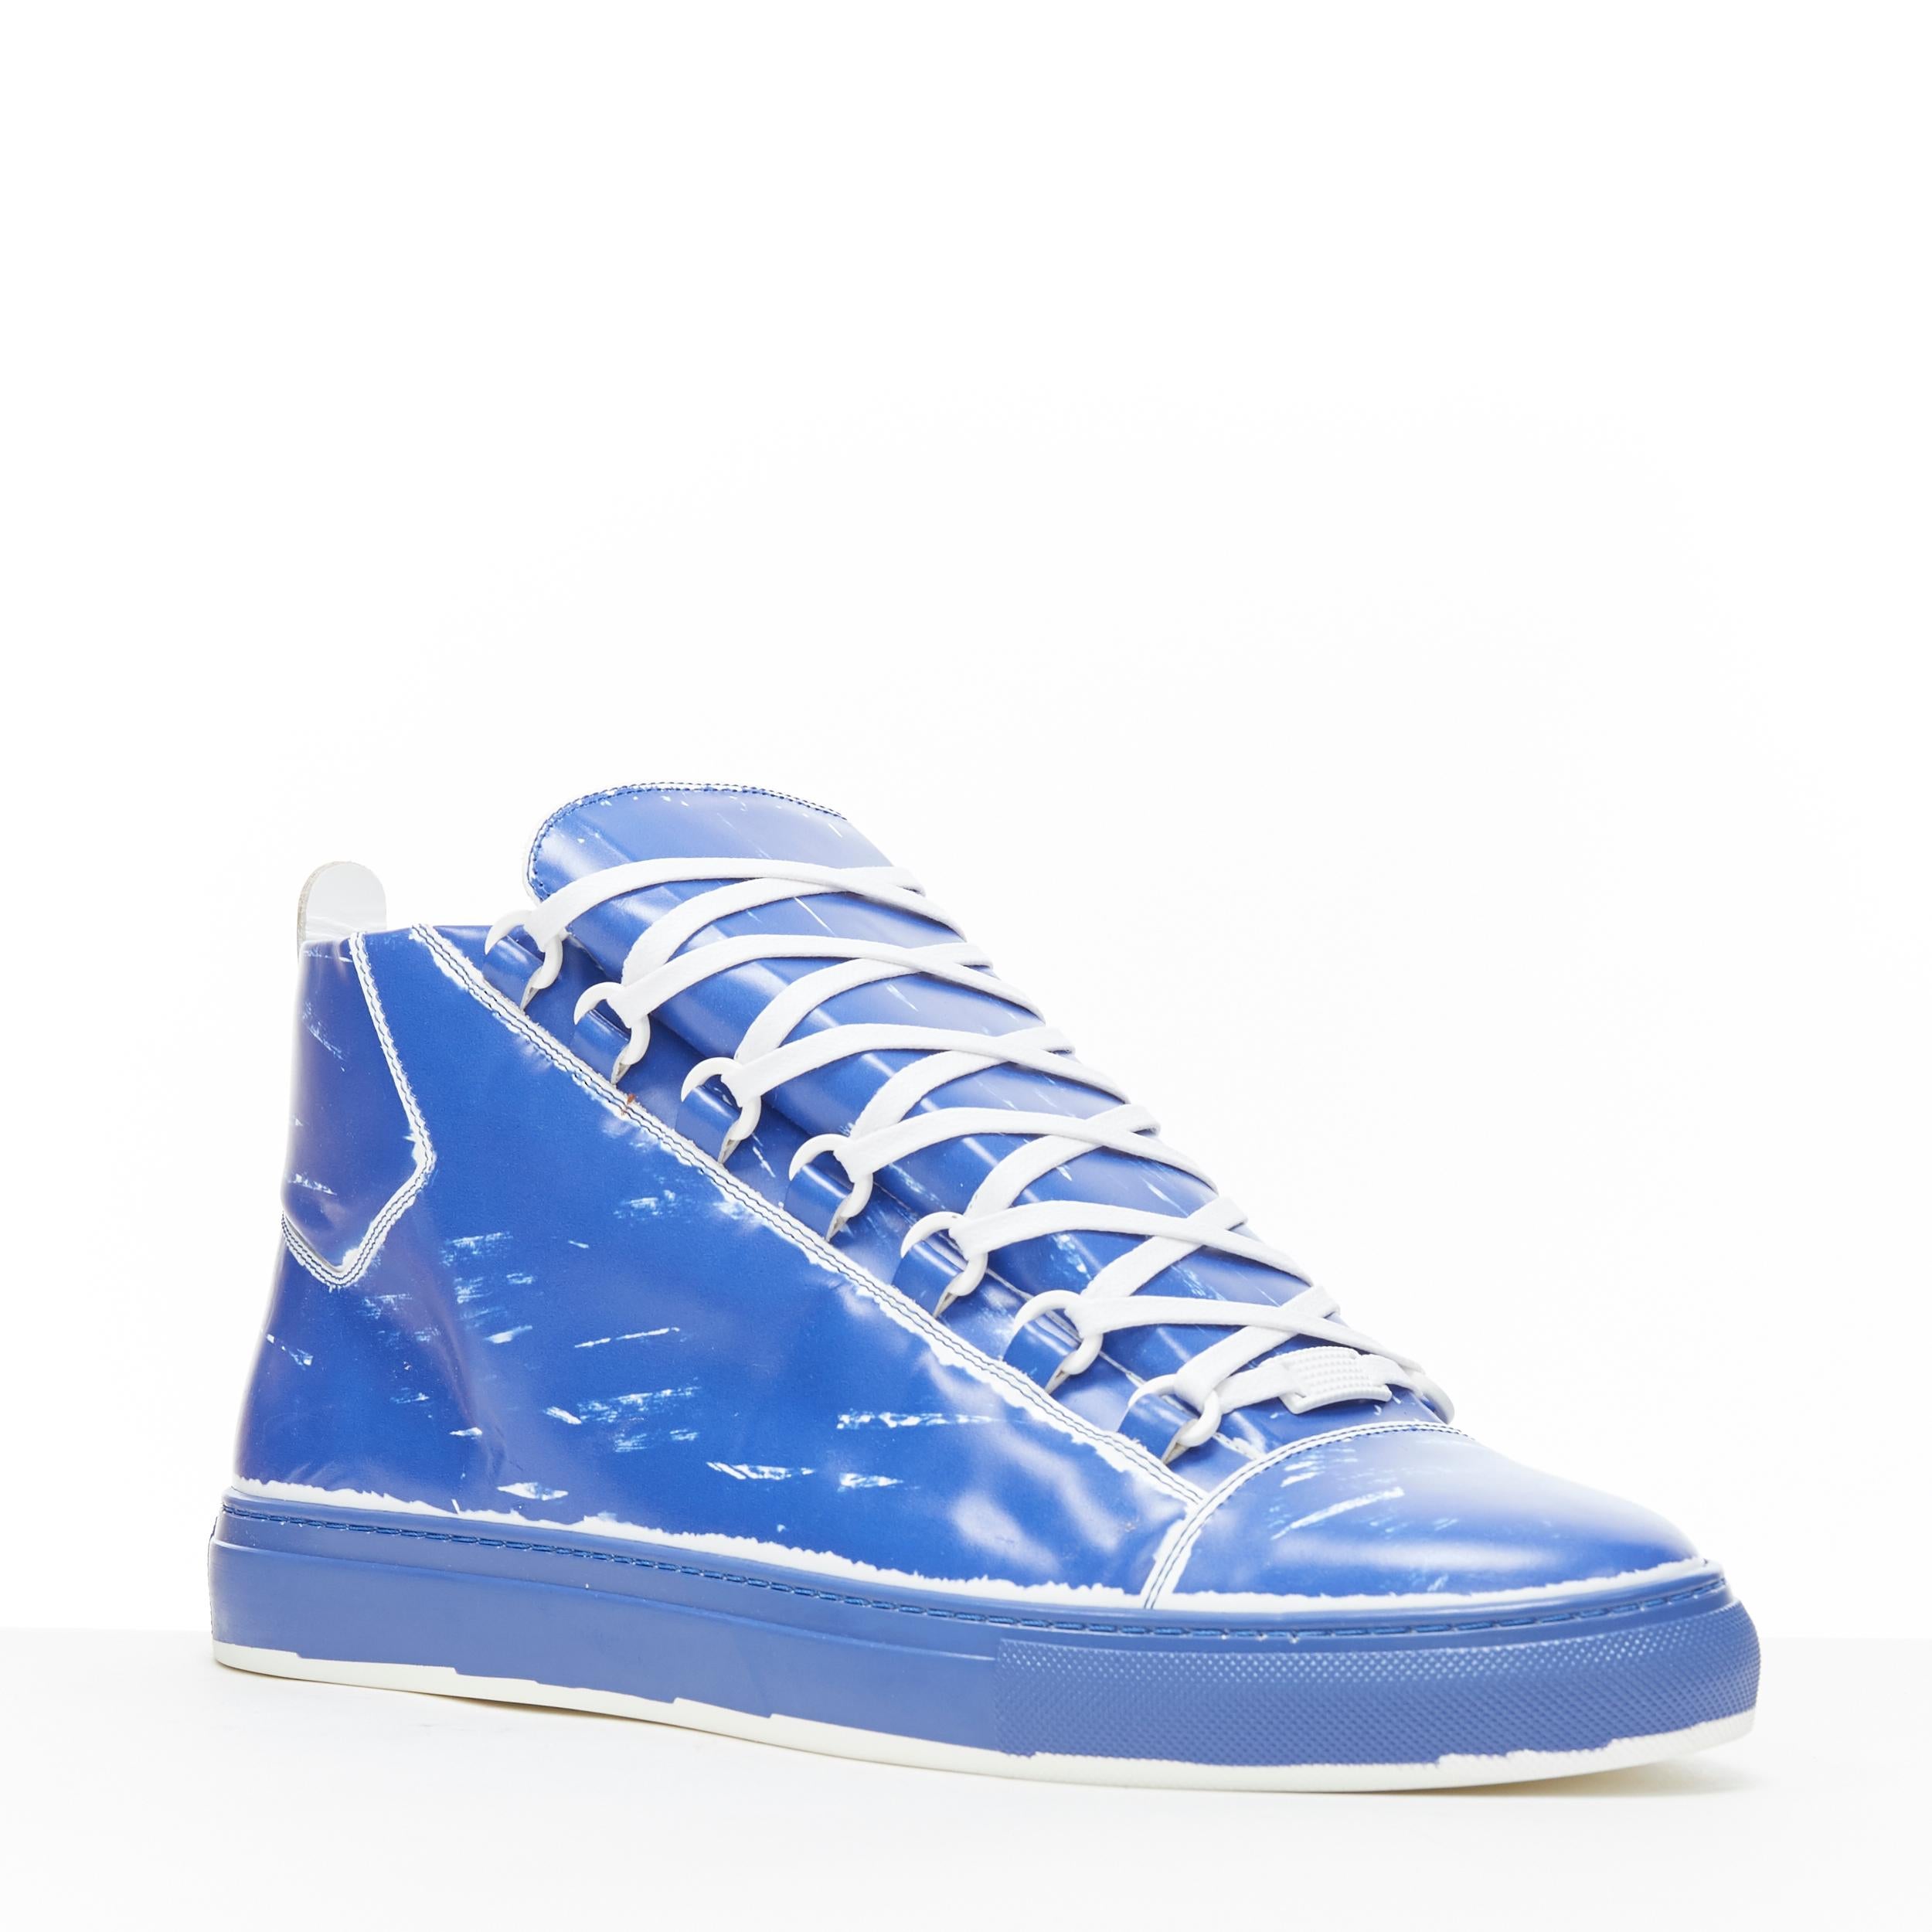 new BALENCIAGA Arena Blue Marker high top sneakers EU44 US11 436343 WAYC0 4307
Brand: Balenciaga
Model Name / Style: Balenciaga Arena
Material: Leather
Color: Red
Pattern: Solid
Closure: Lace up
Extra Detail: A classic luxury sneaker style from